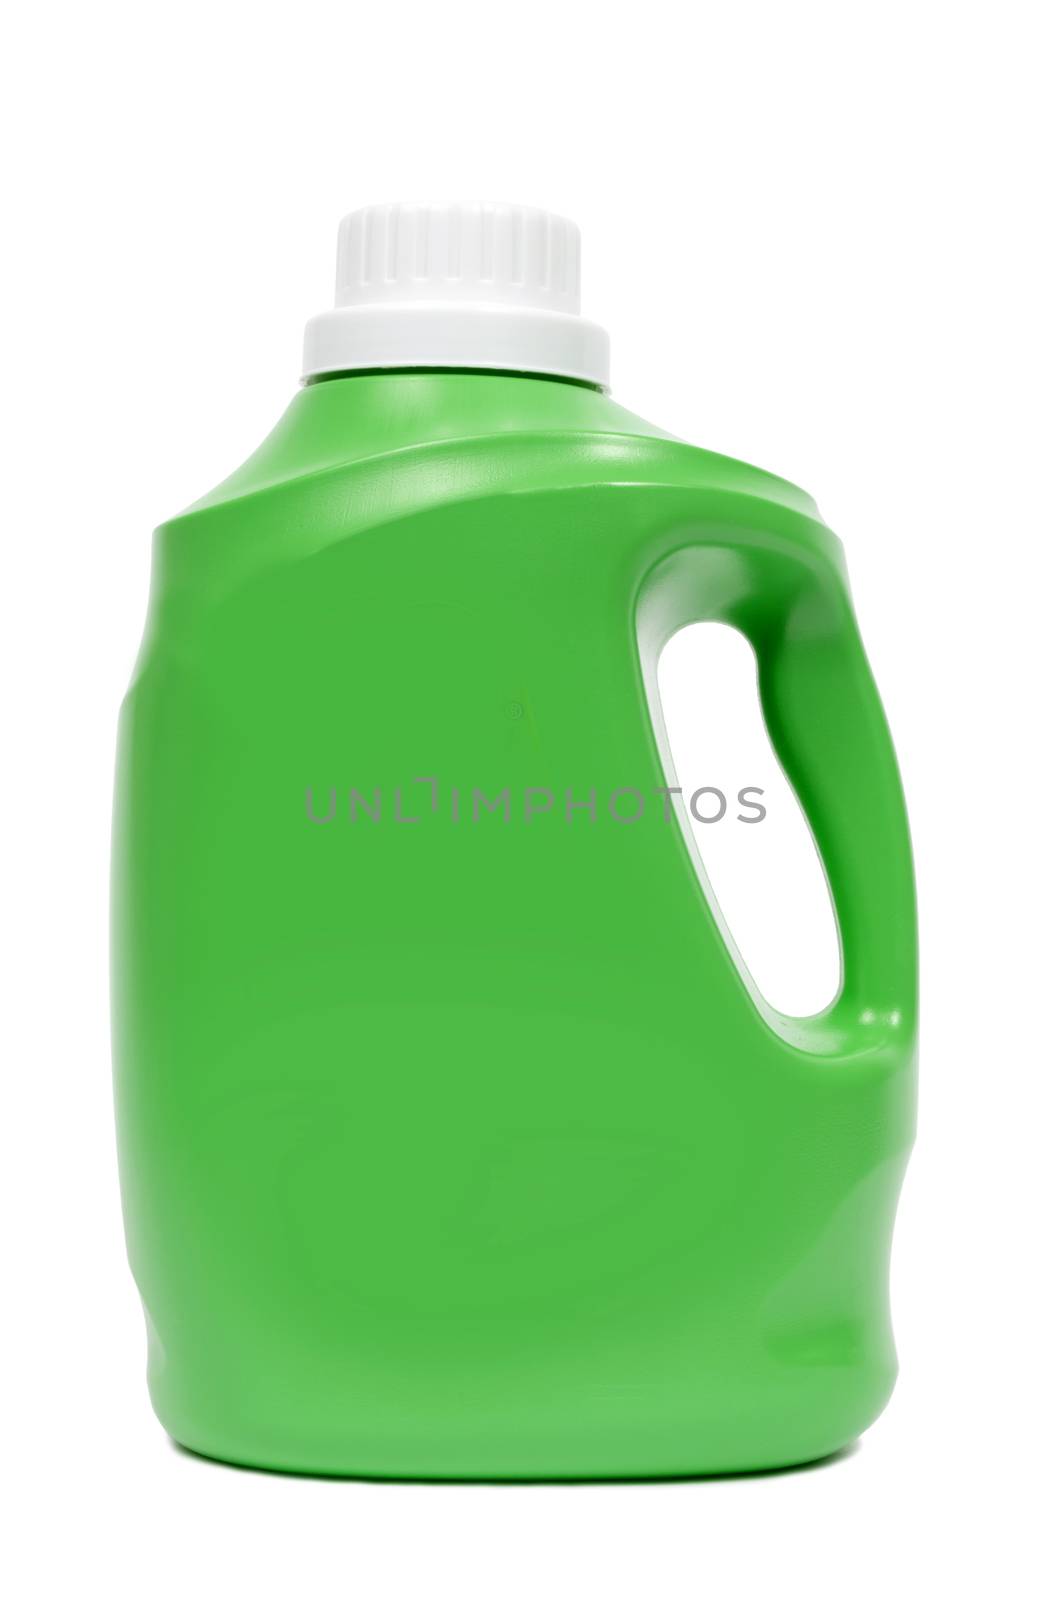 Detergent Container On White Background With Blank Front by stockbuster1